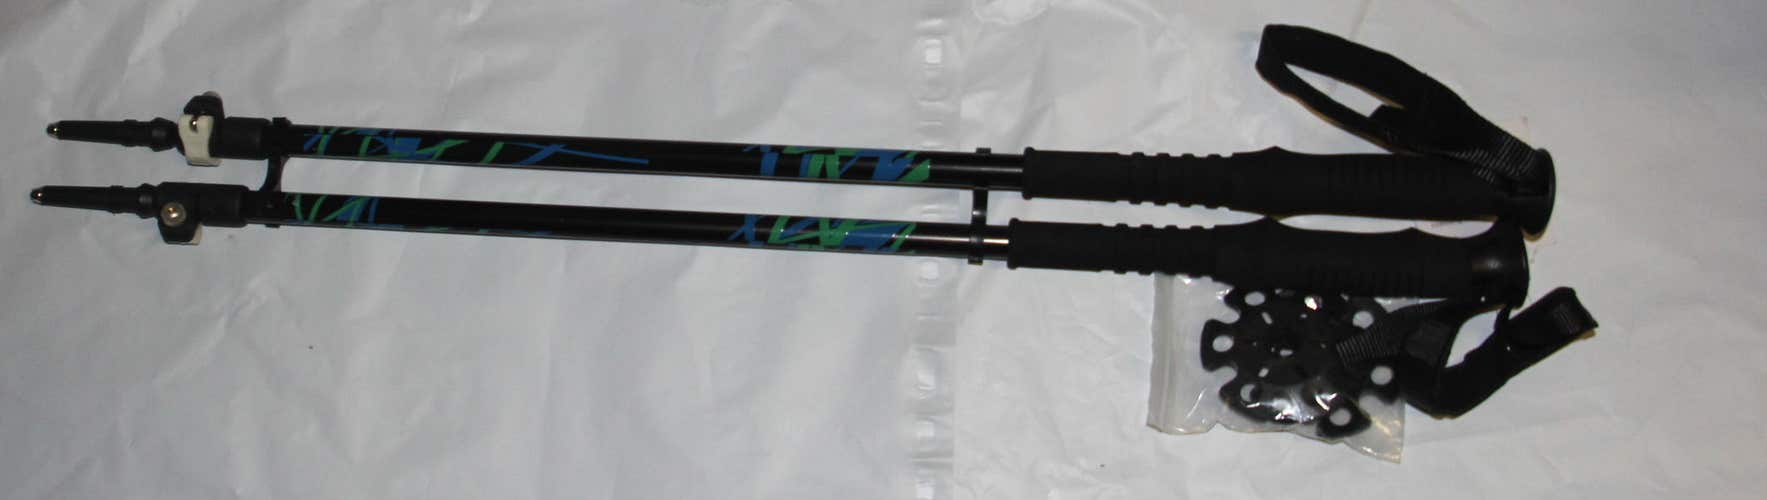 new store wear Ski poles Telescopic adjustable Collapsible Adult dowhill WSD 115cm  to 135 cm